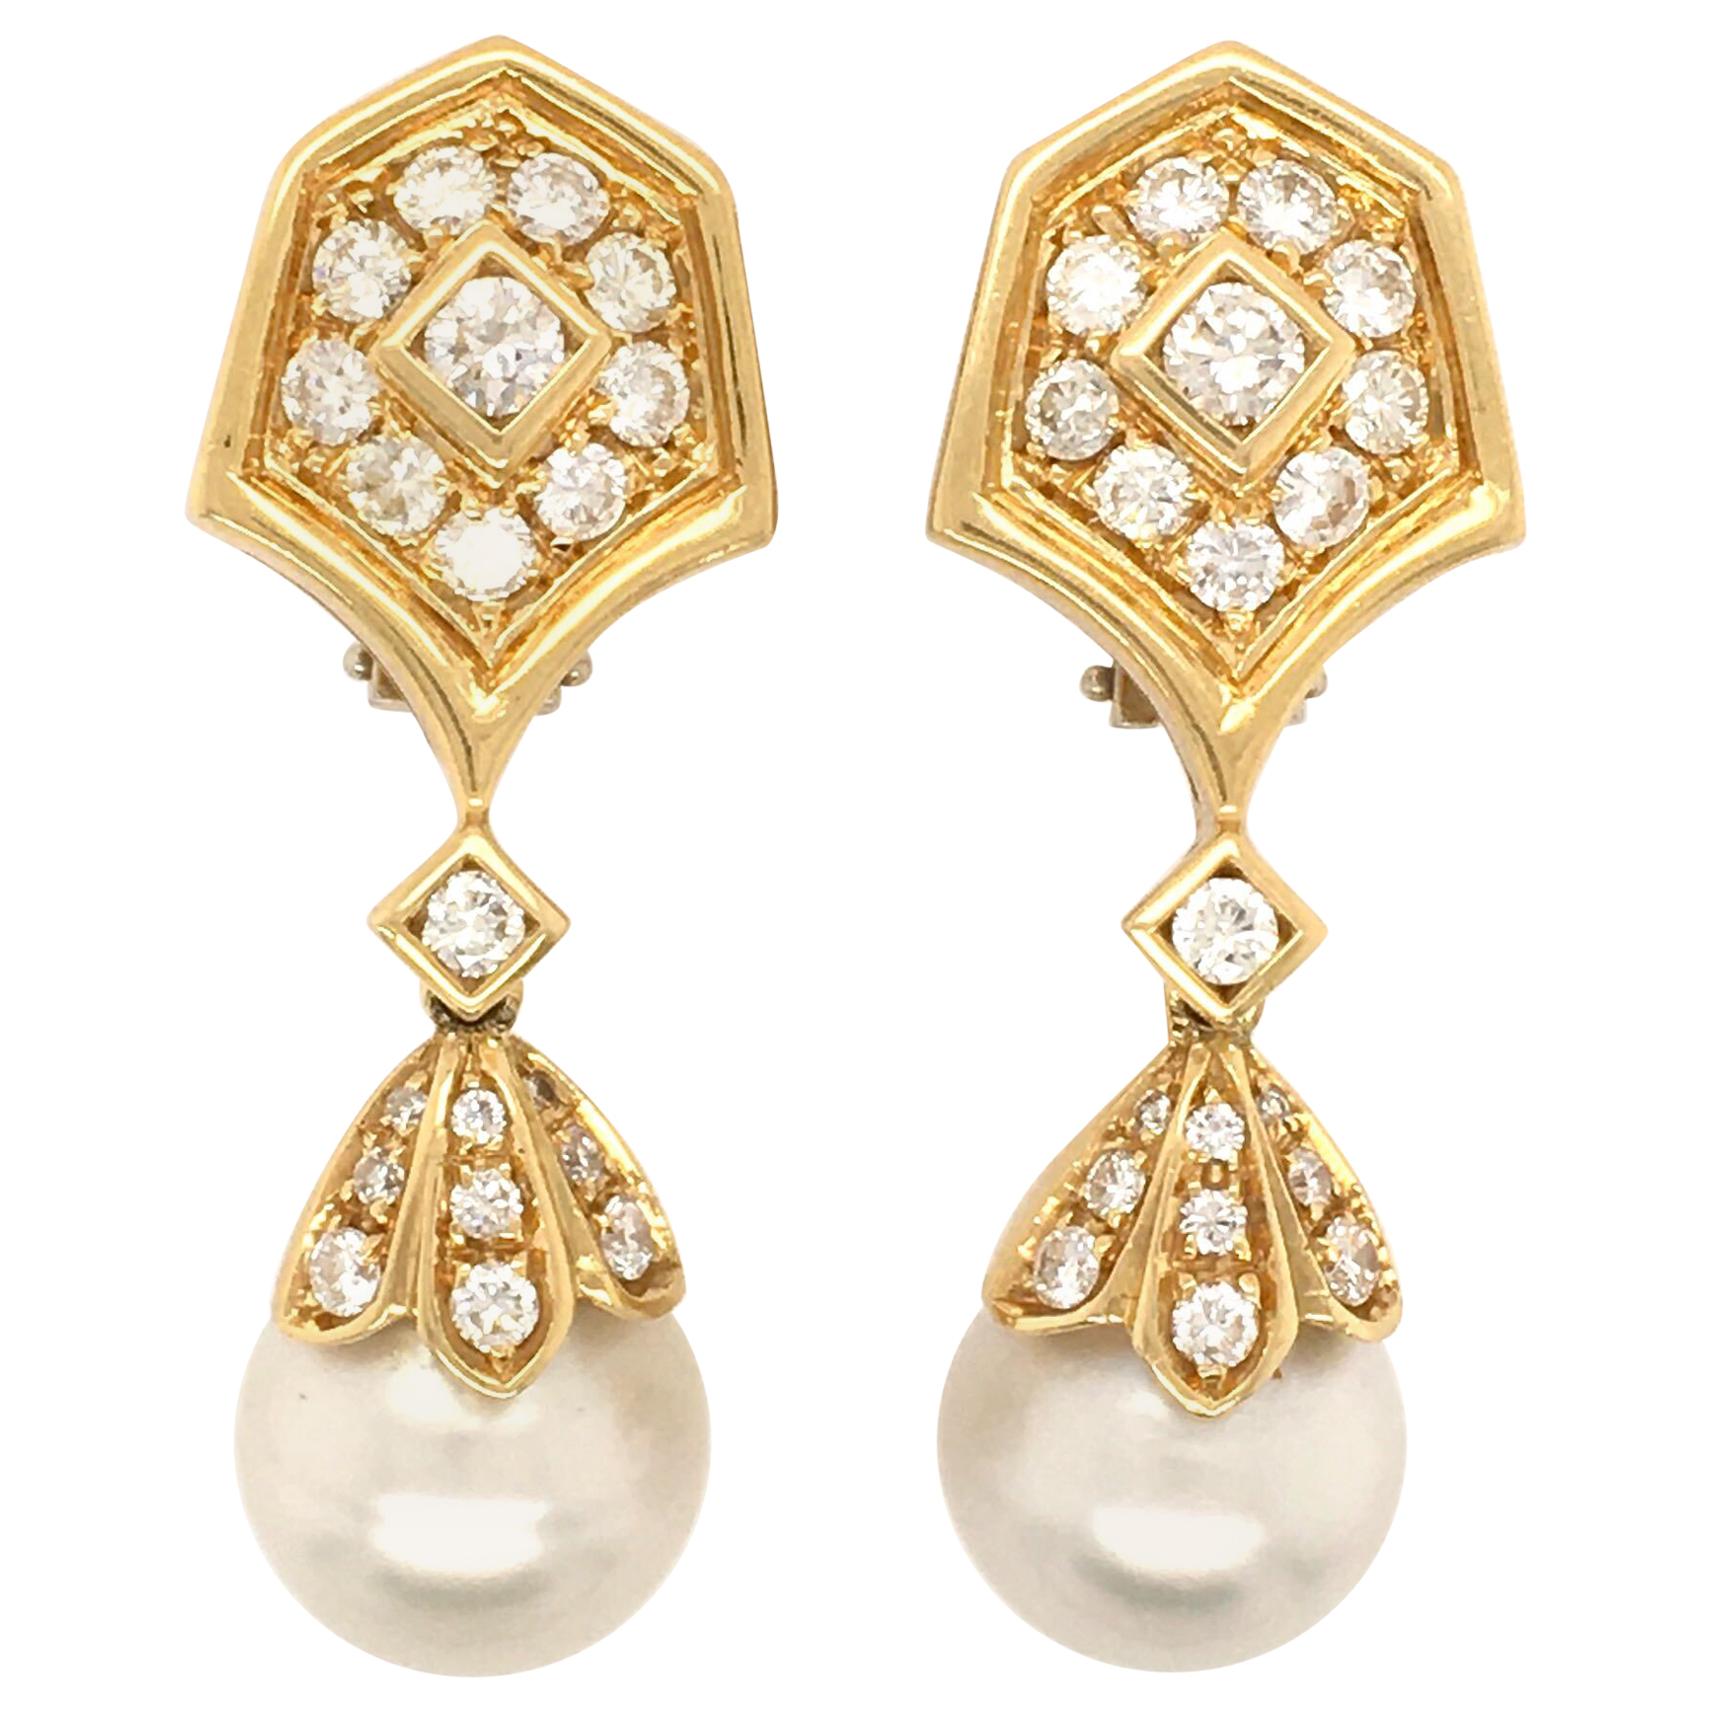 Pair of Gold, Diamond and Pearl Drop Earrings